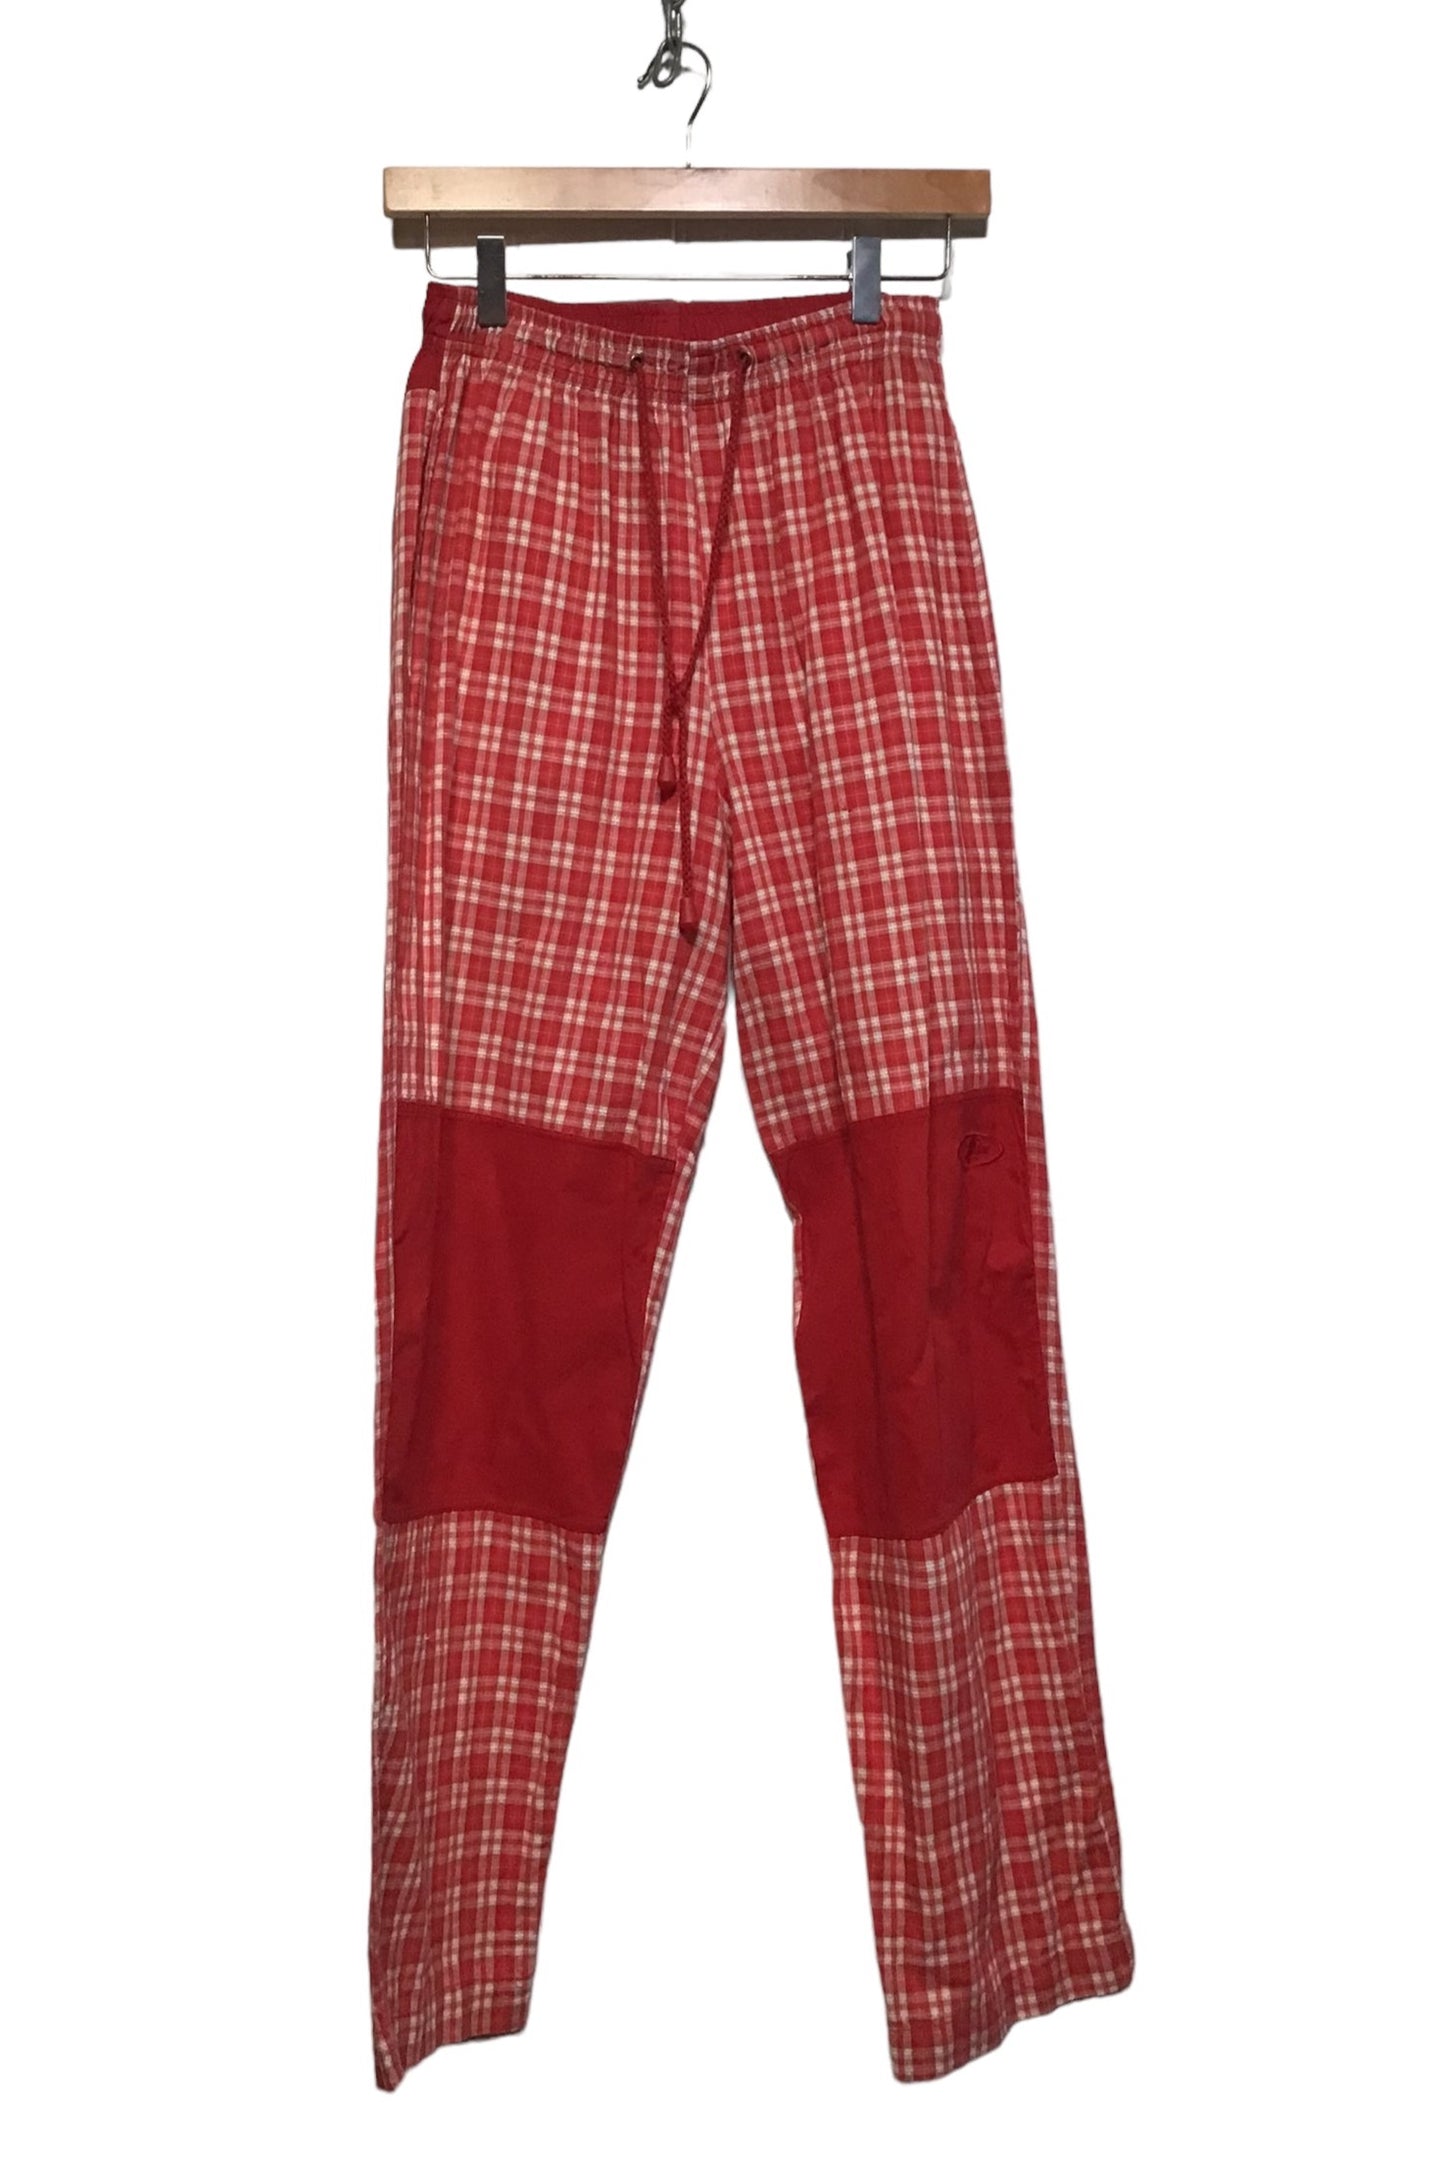 Red Checked Trousers (Size S)